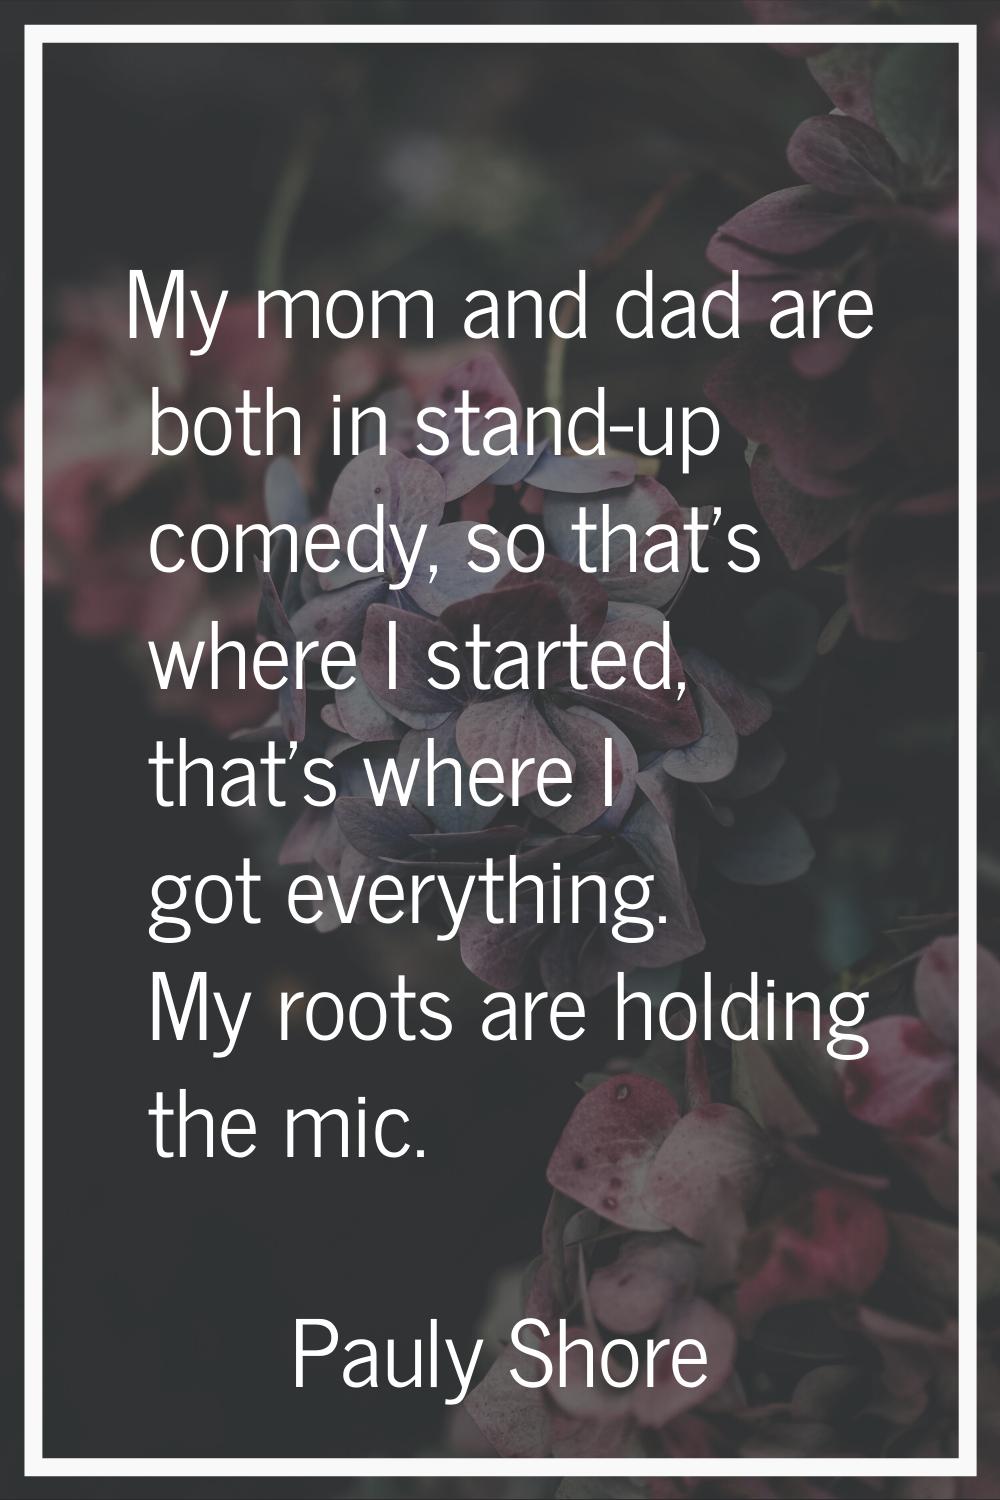 My mom and dad are both in stand-up comedy, so that's where I started, that's where I got everythin